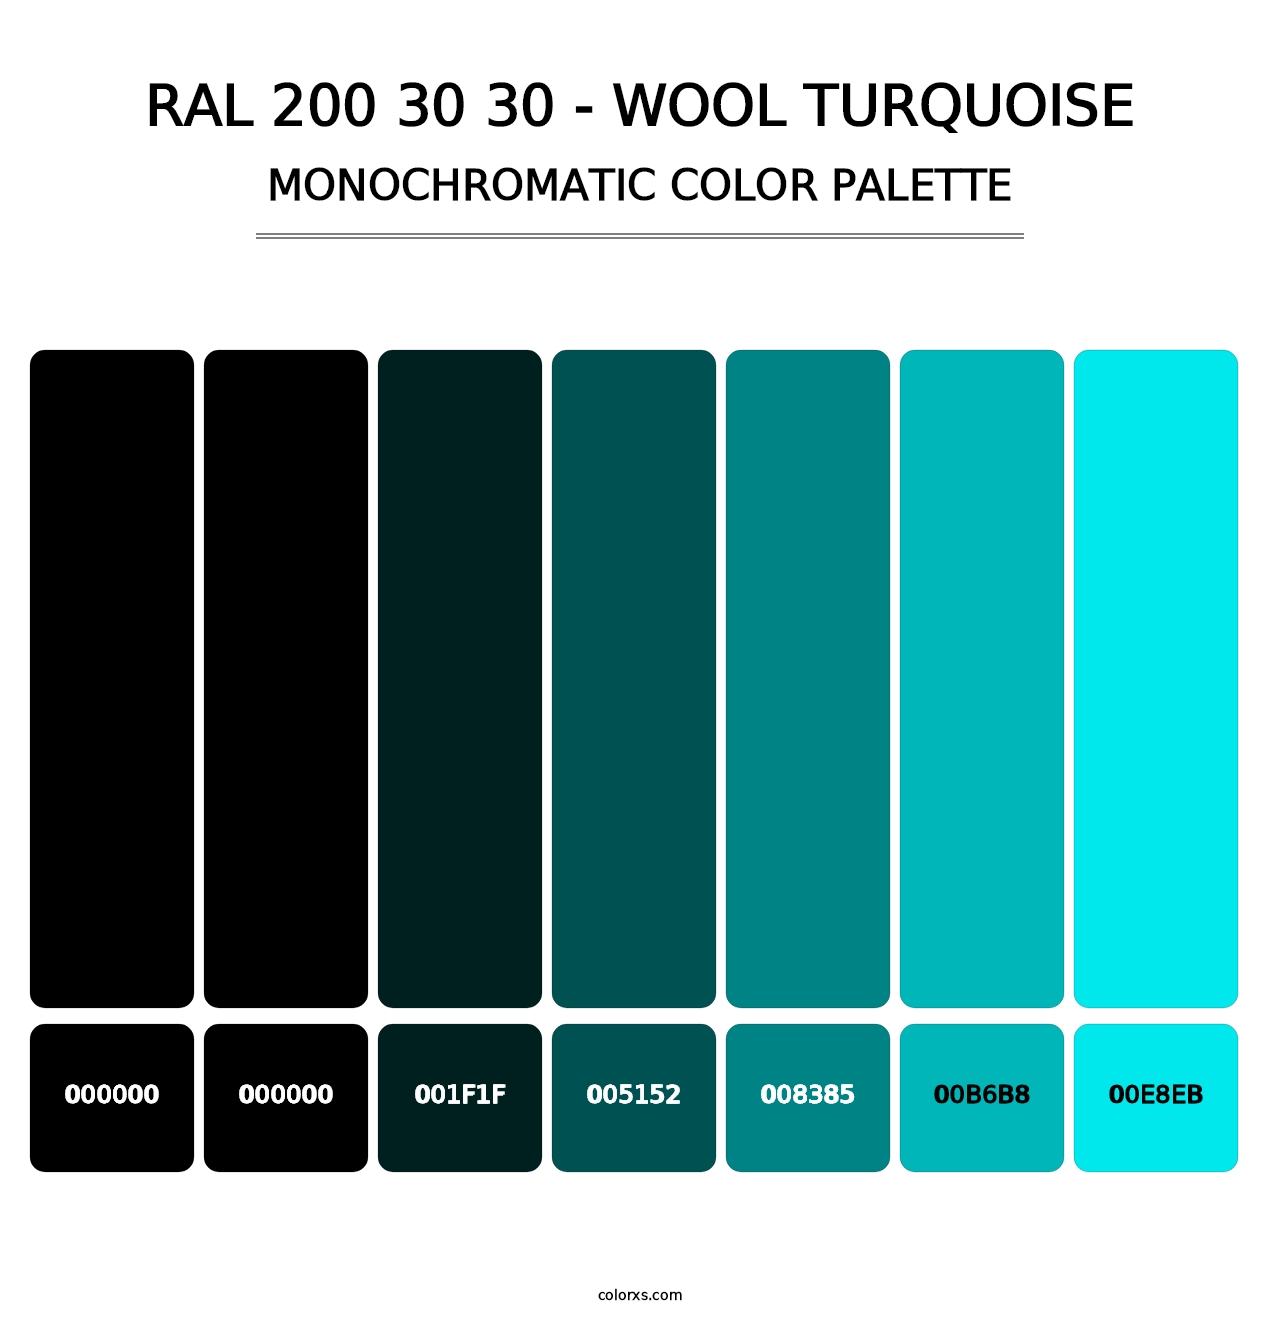 RAL 200 30 30 - Wool Turquoise - Monochromatic Color Palette